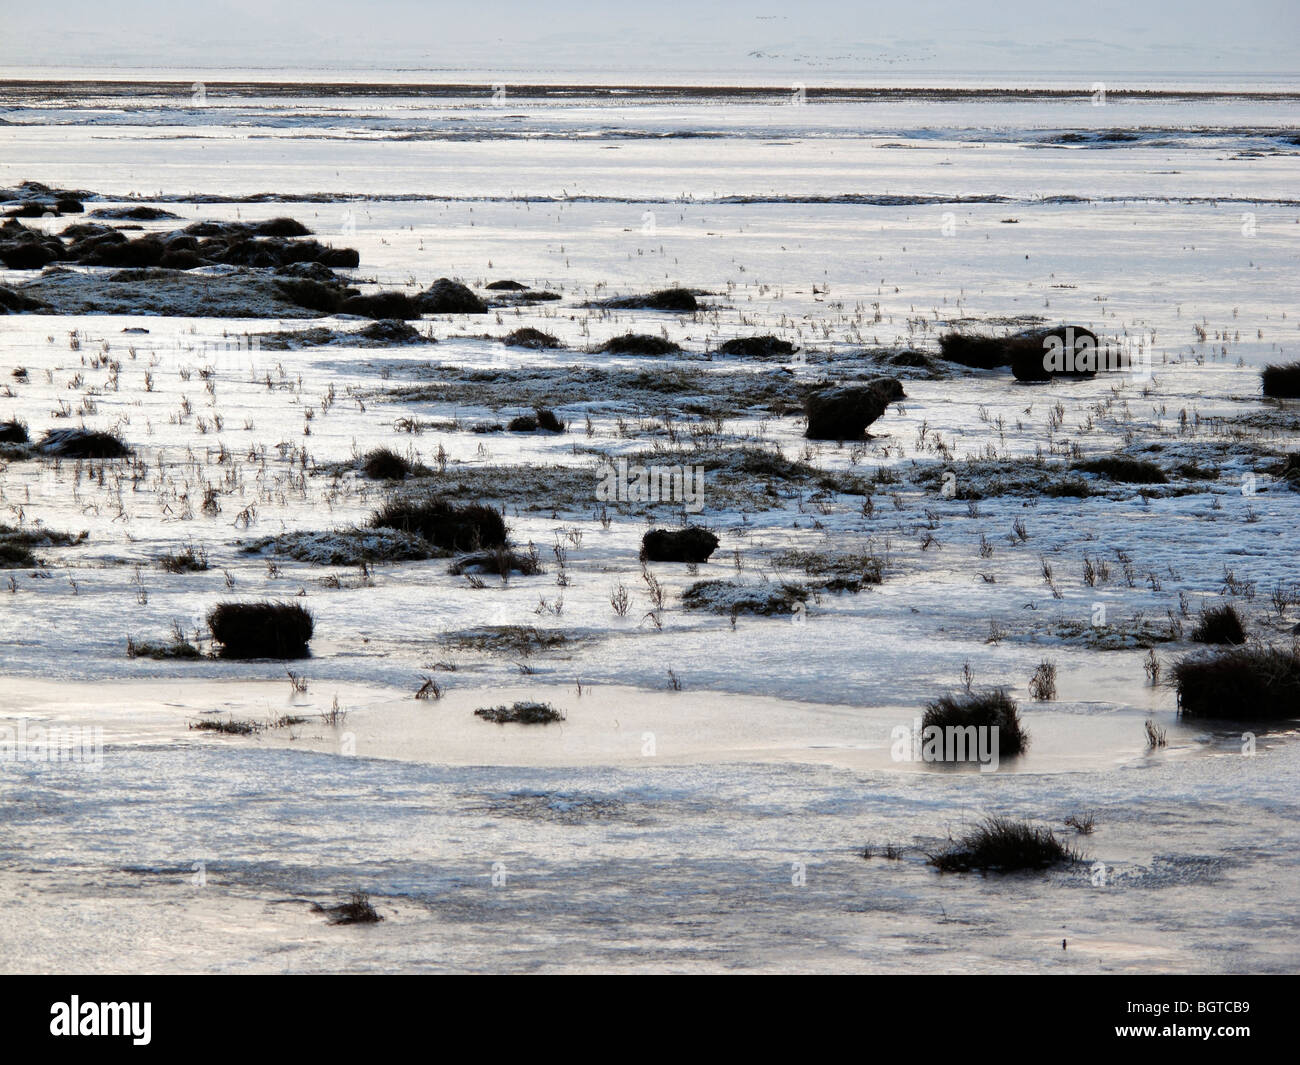 Caerlaverock National Nature Reserve the Solway Firth, south of Dumfries, Scotland. Icy estuary. December 2009 Stock Photo